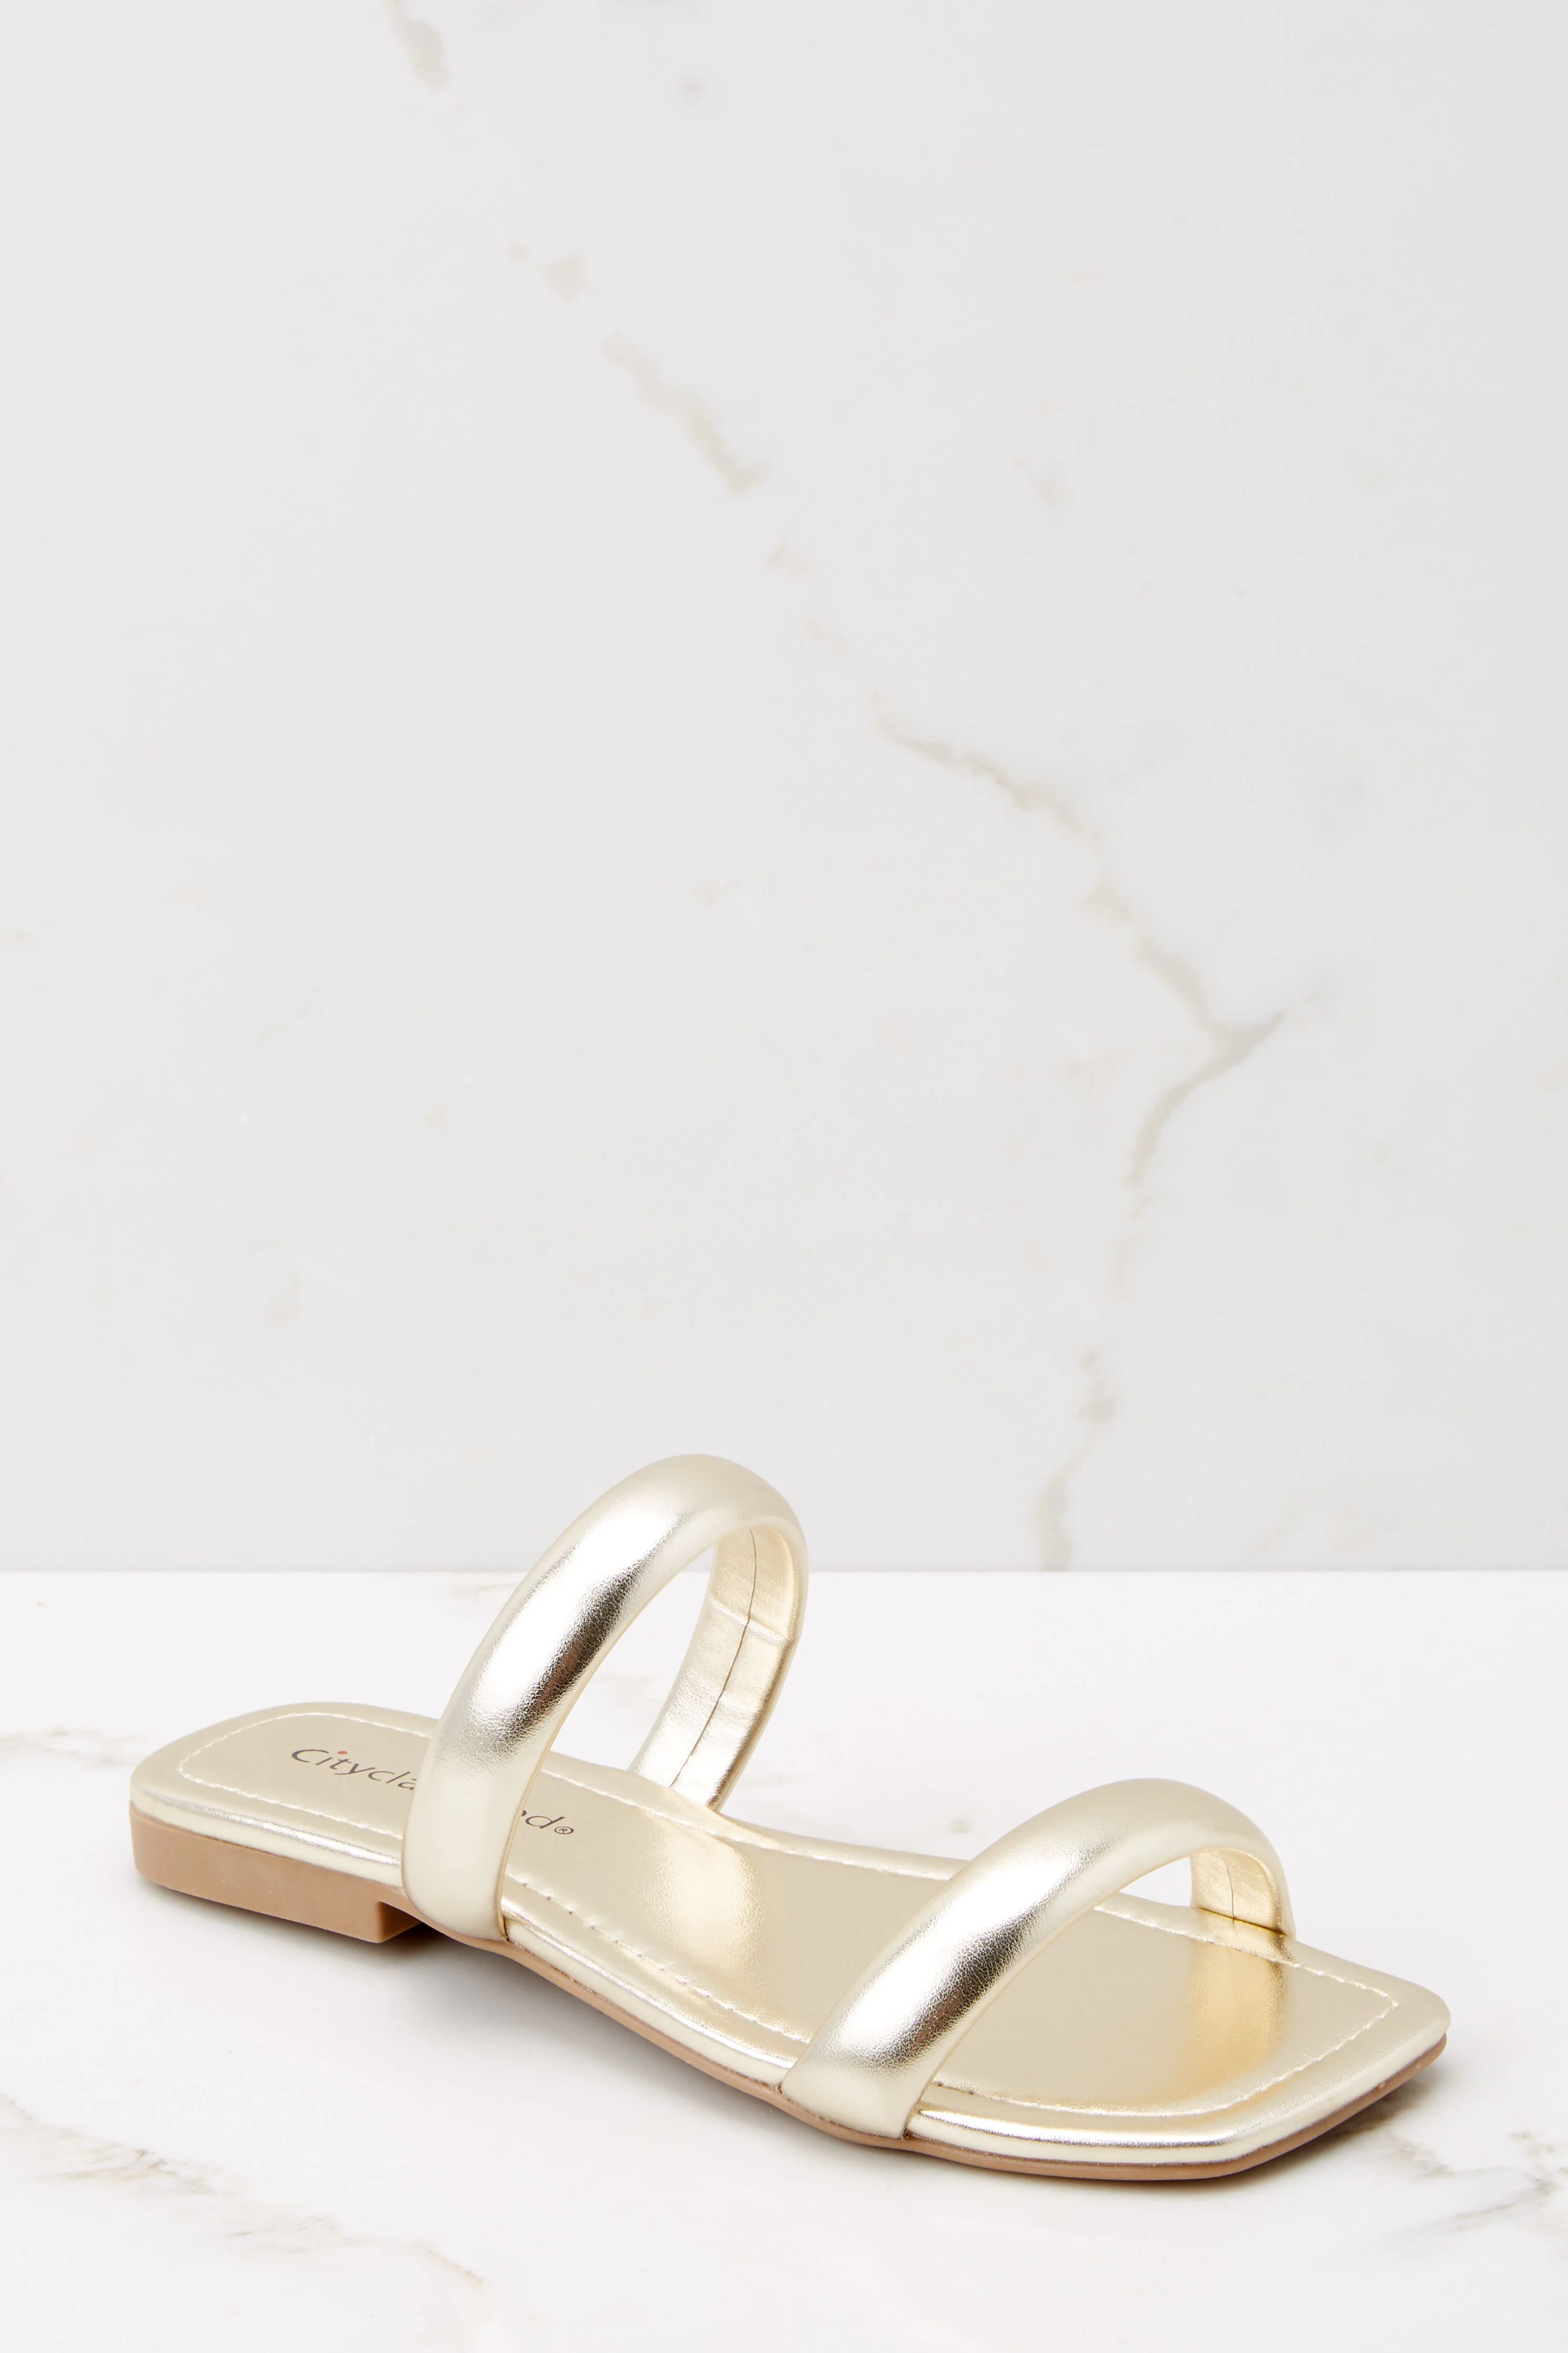 Her Moment Gold Sandals | Red Dress 